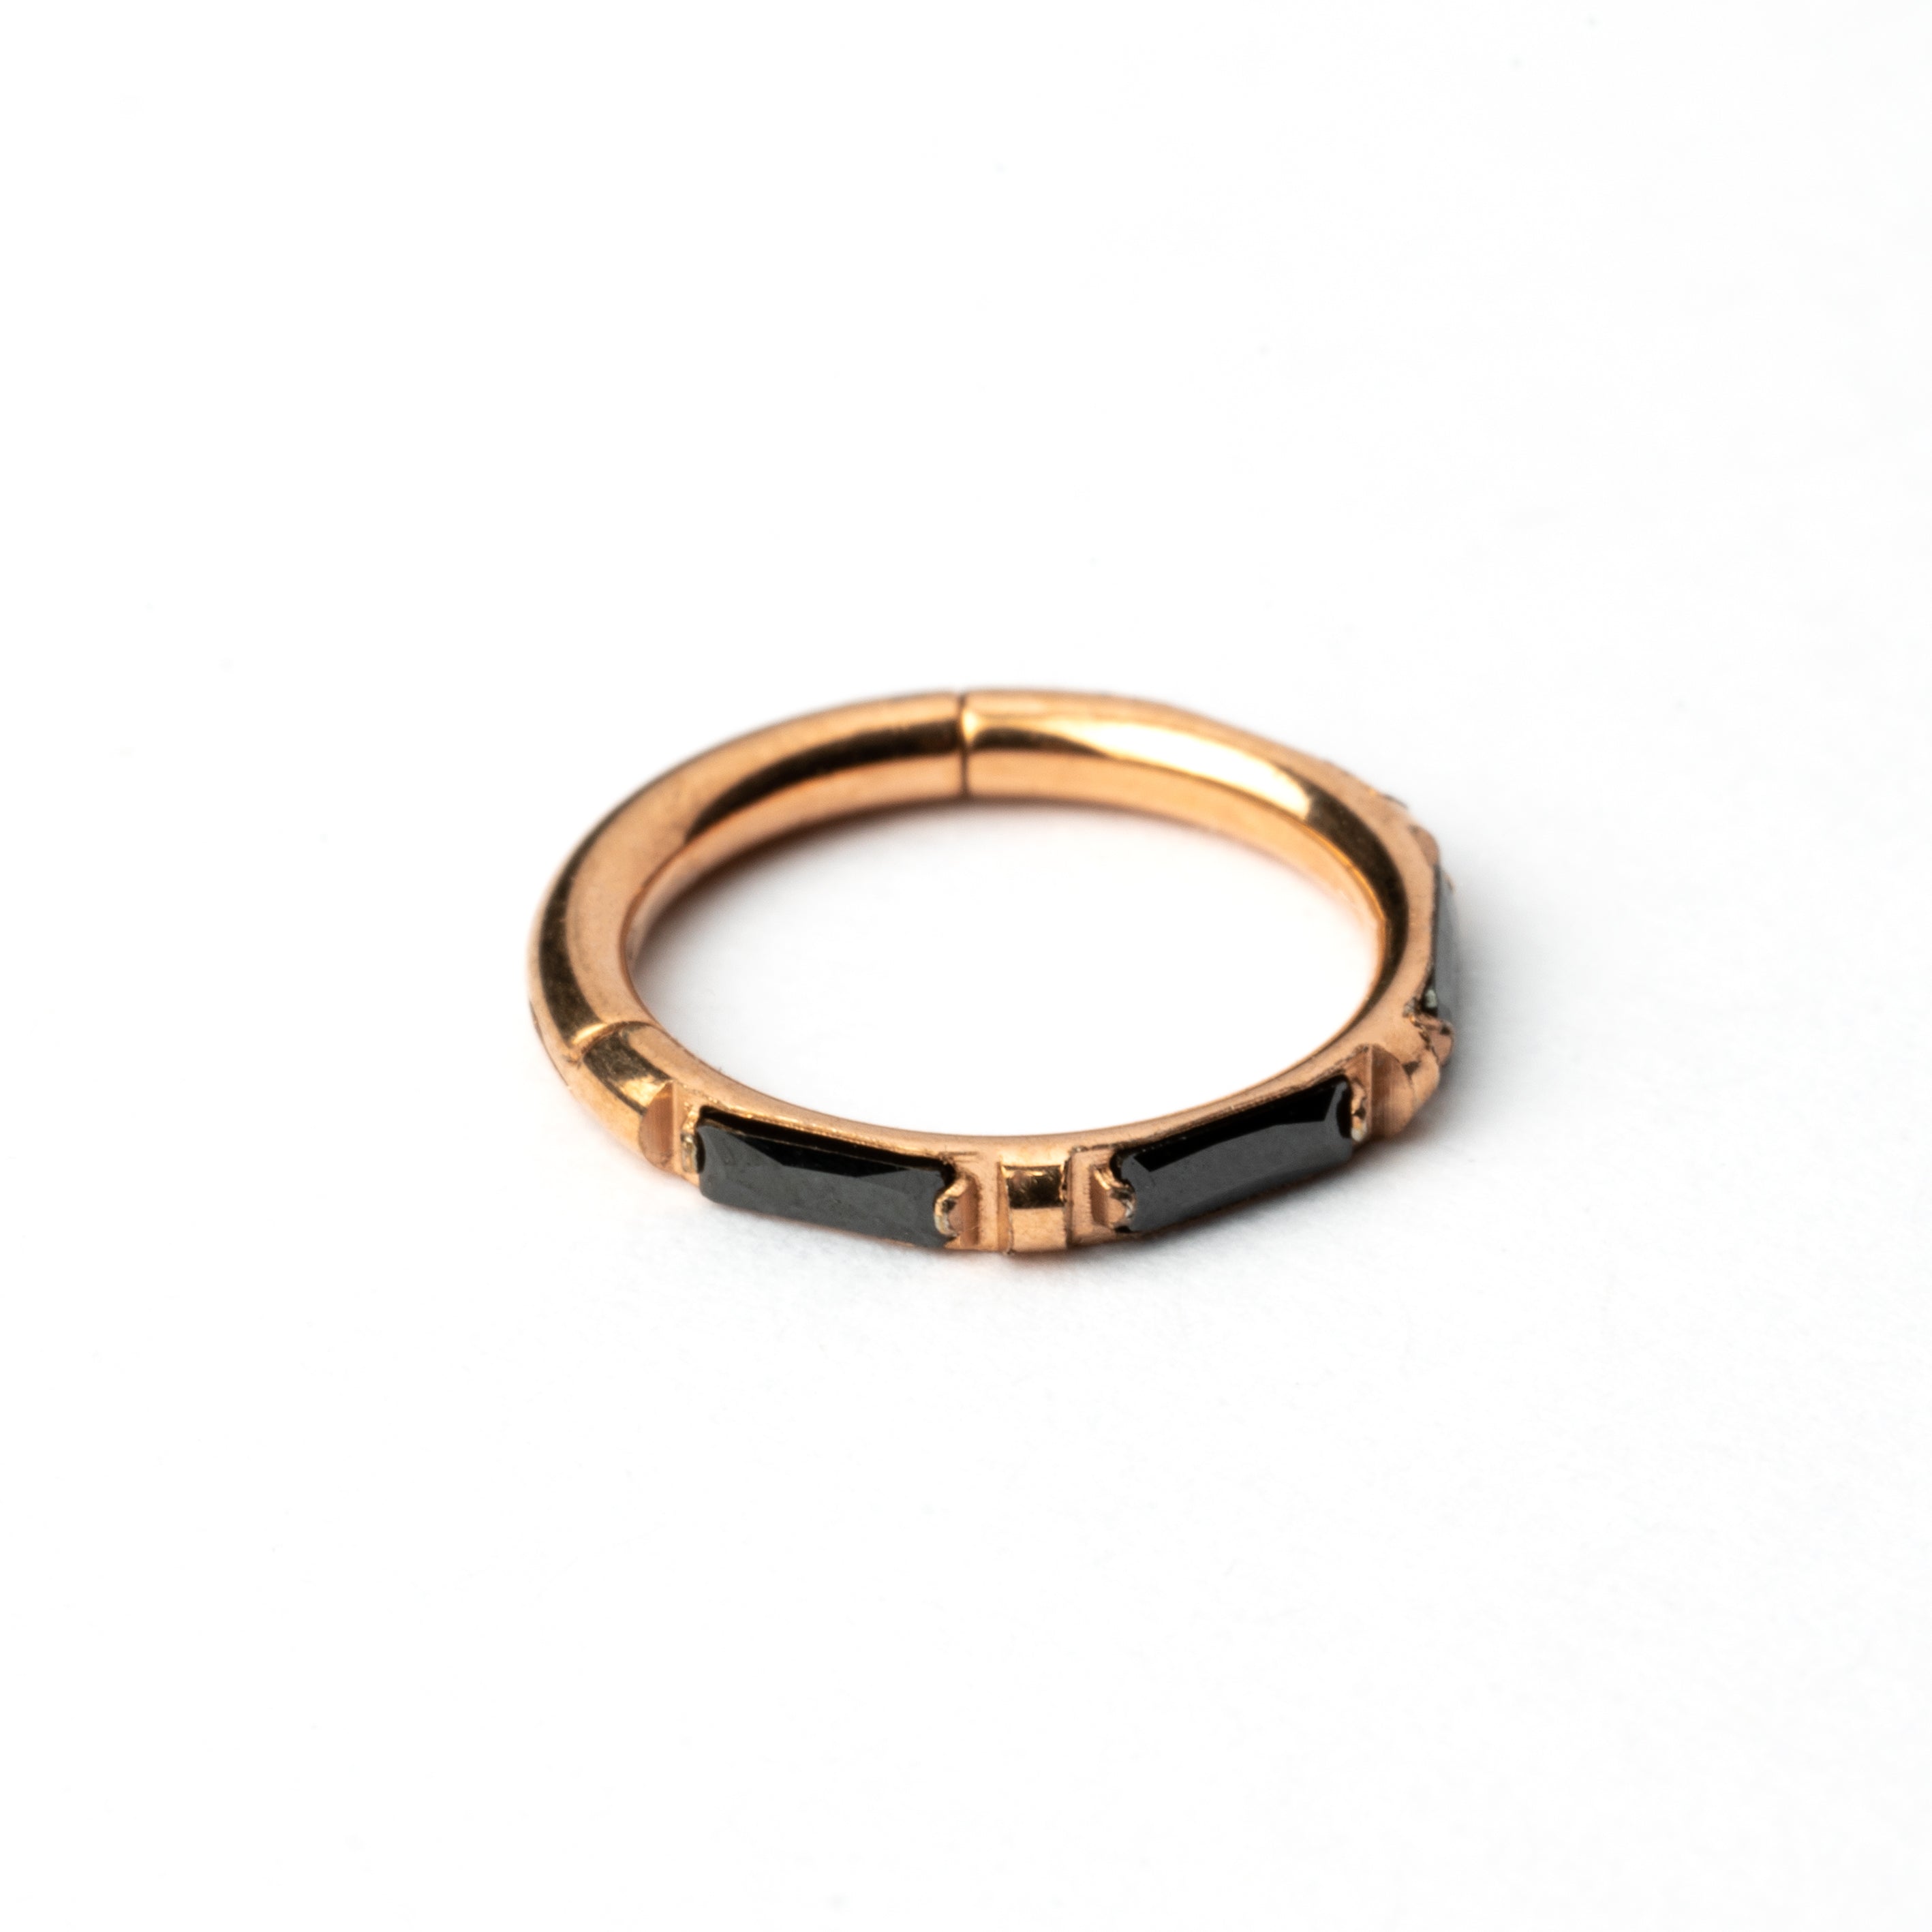 Rose Gold septum clicker with black onyx stones around its rim frontal view